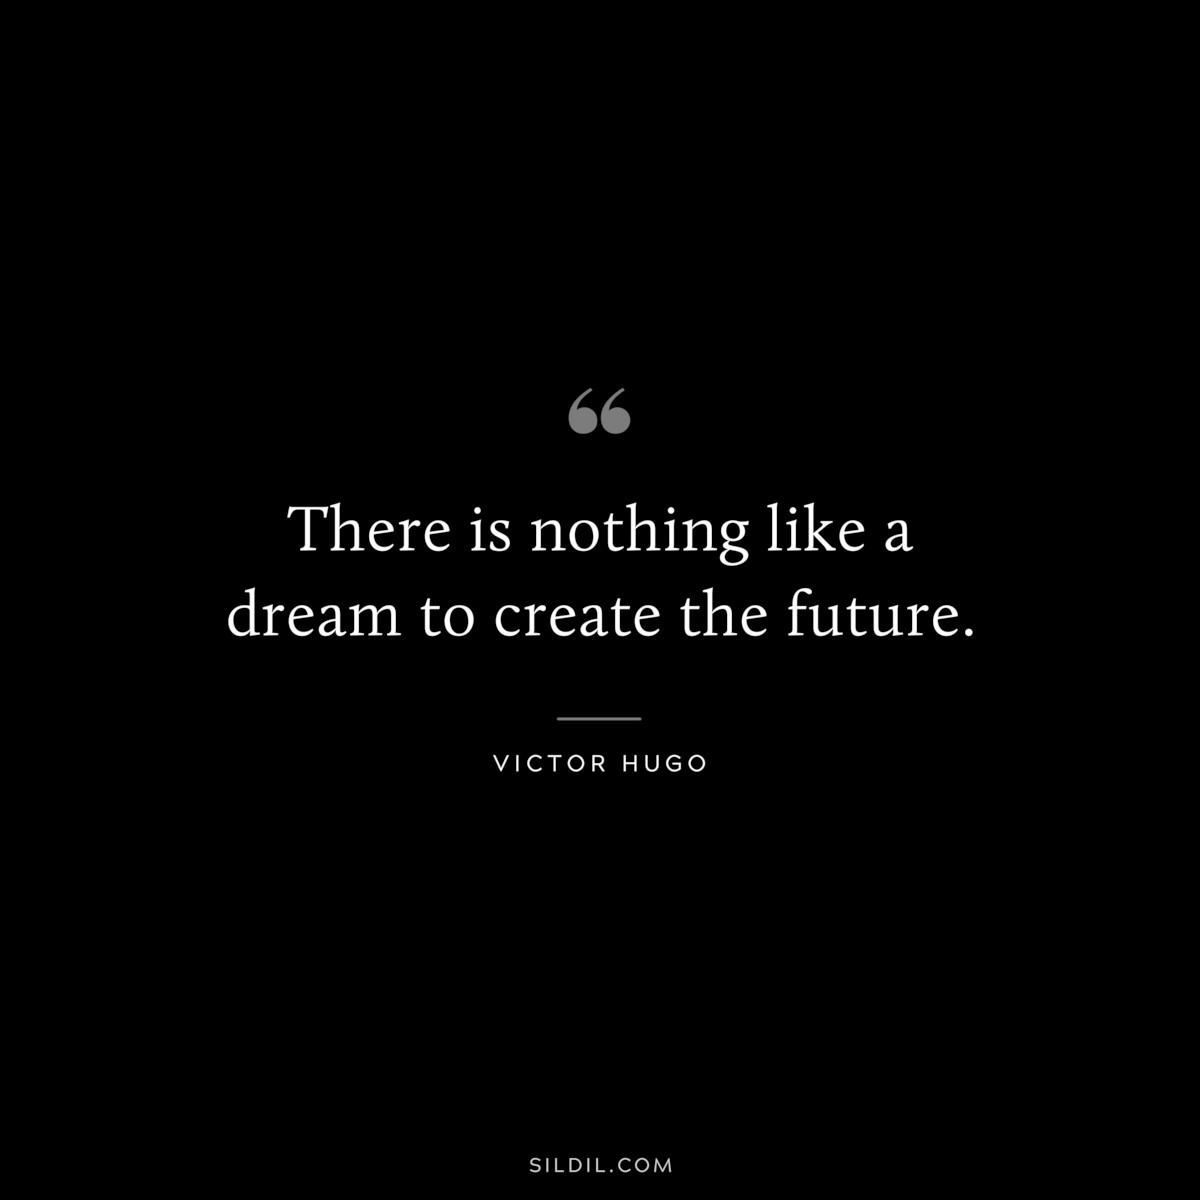 There is nothing like a dream to create the future.― Victor Hugo